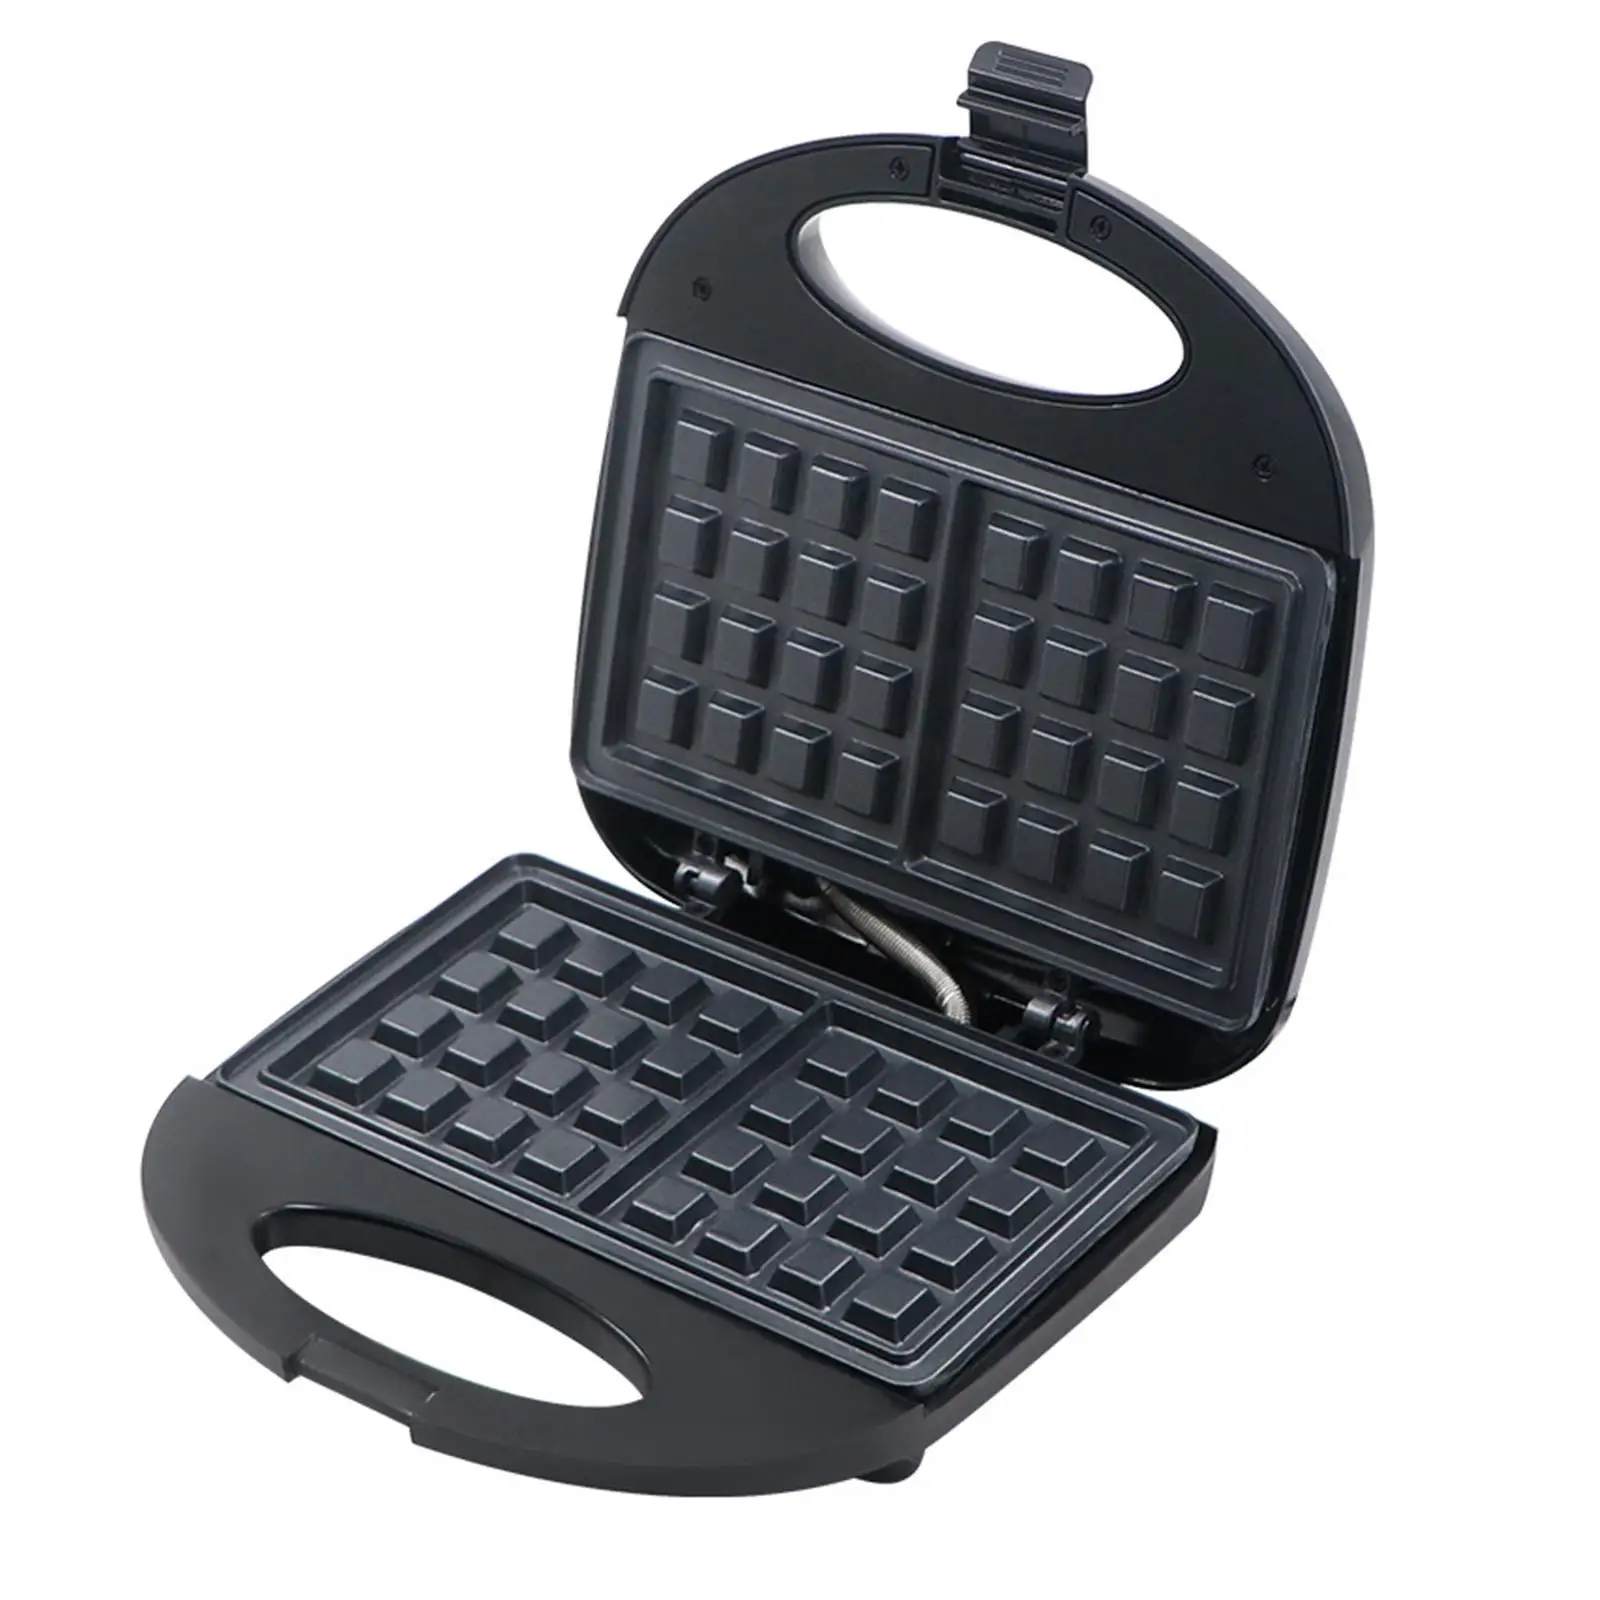 Waffle Machine with Handle Snack Maker Bakeware Cake Oven Baking Machine Waffle Maker for Pancakes Muffins Lunch Panini